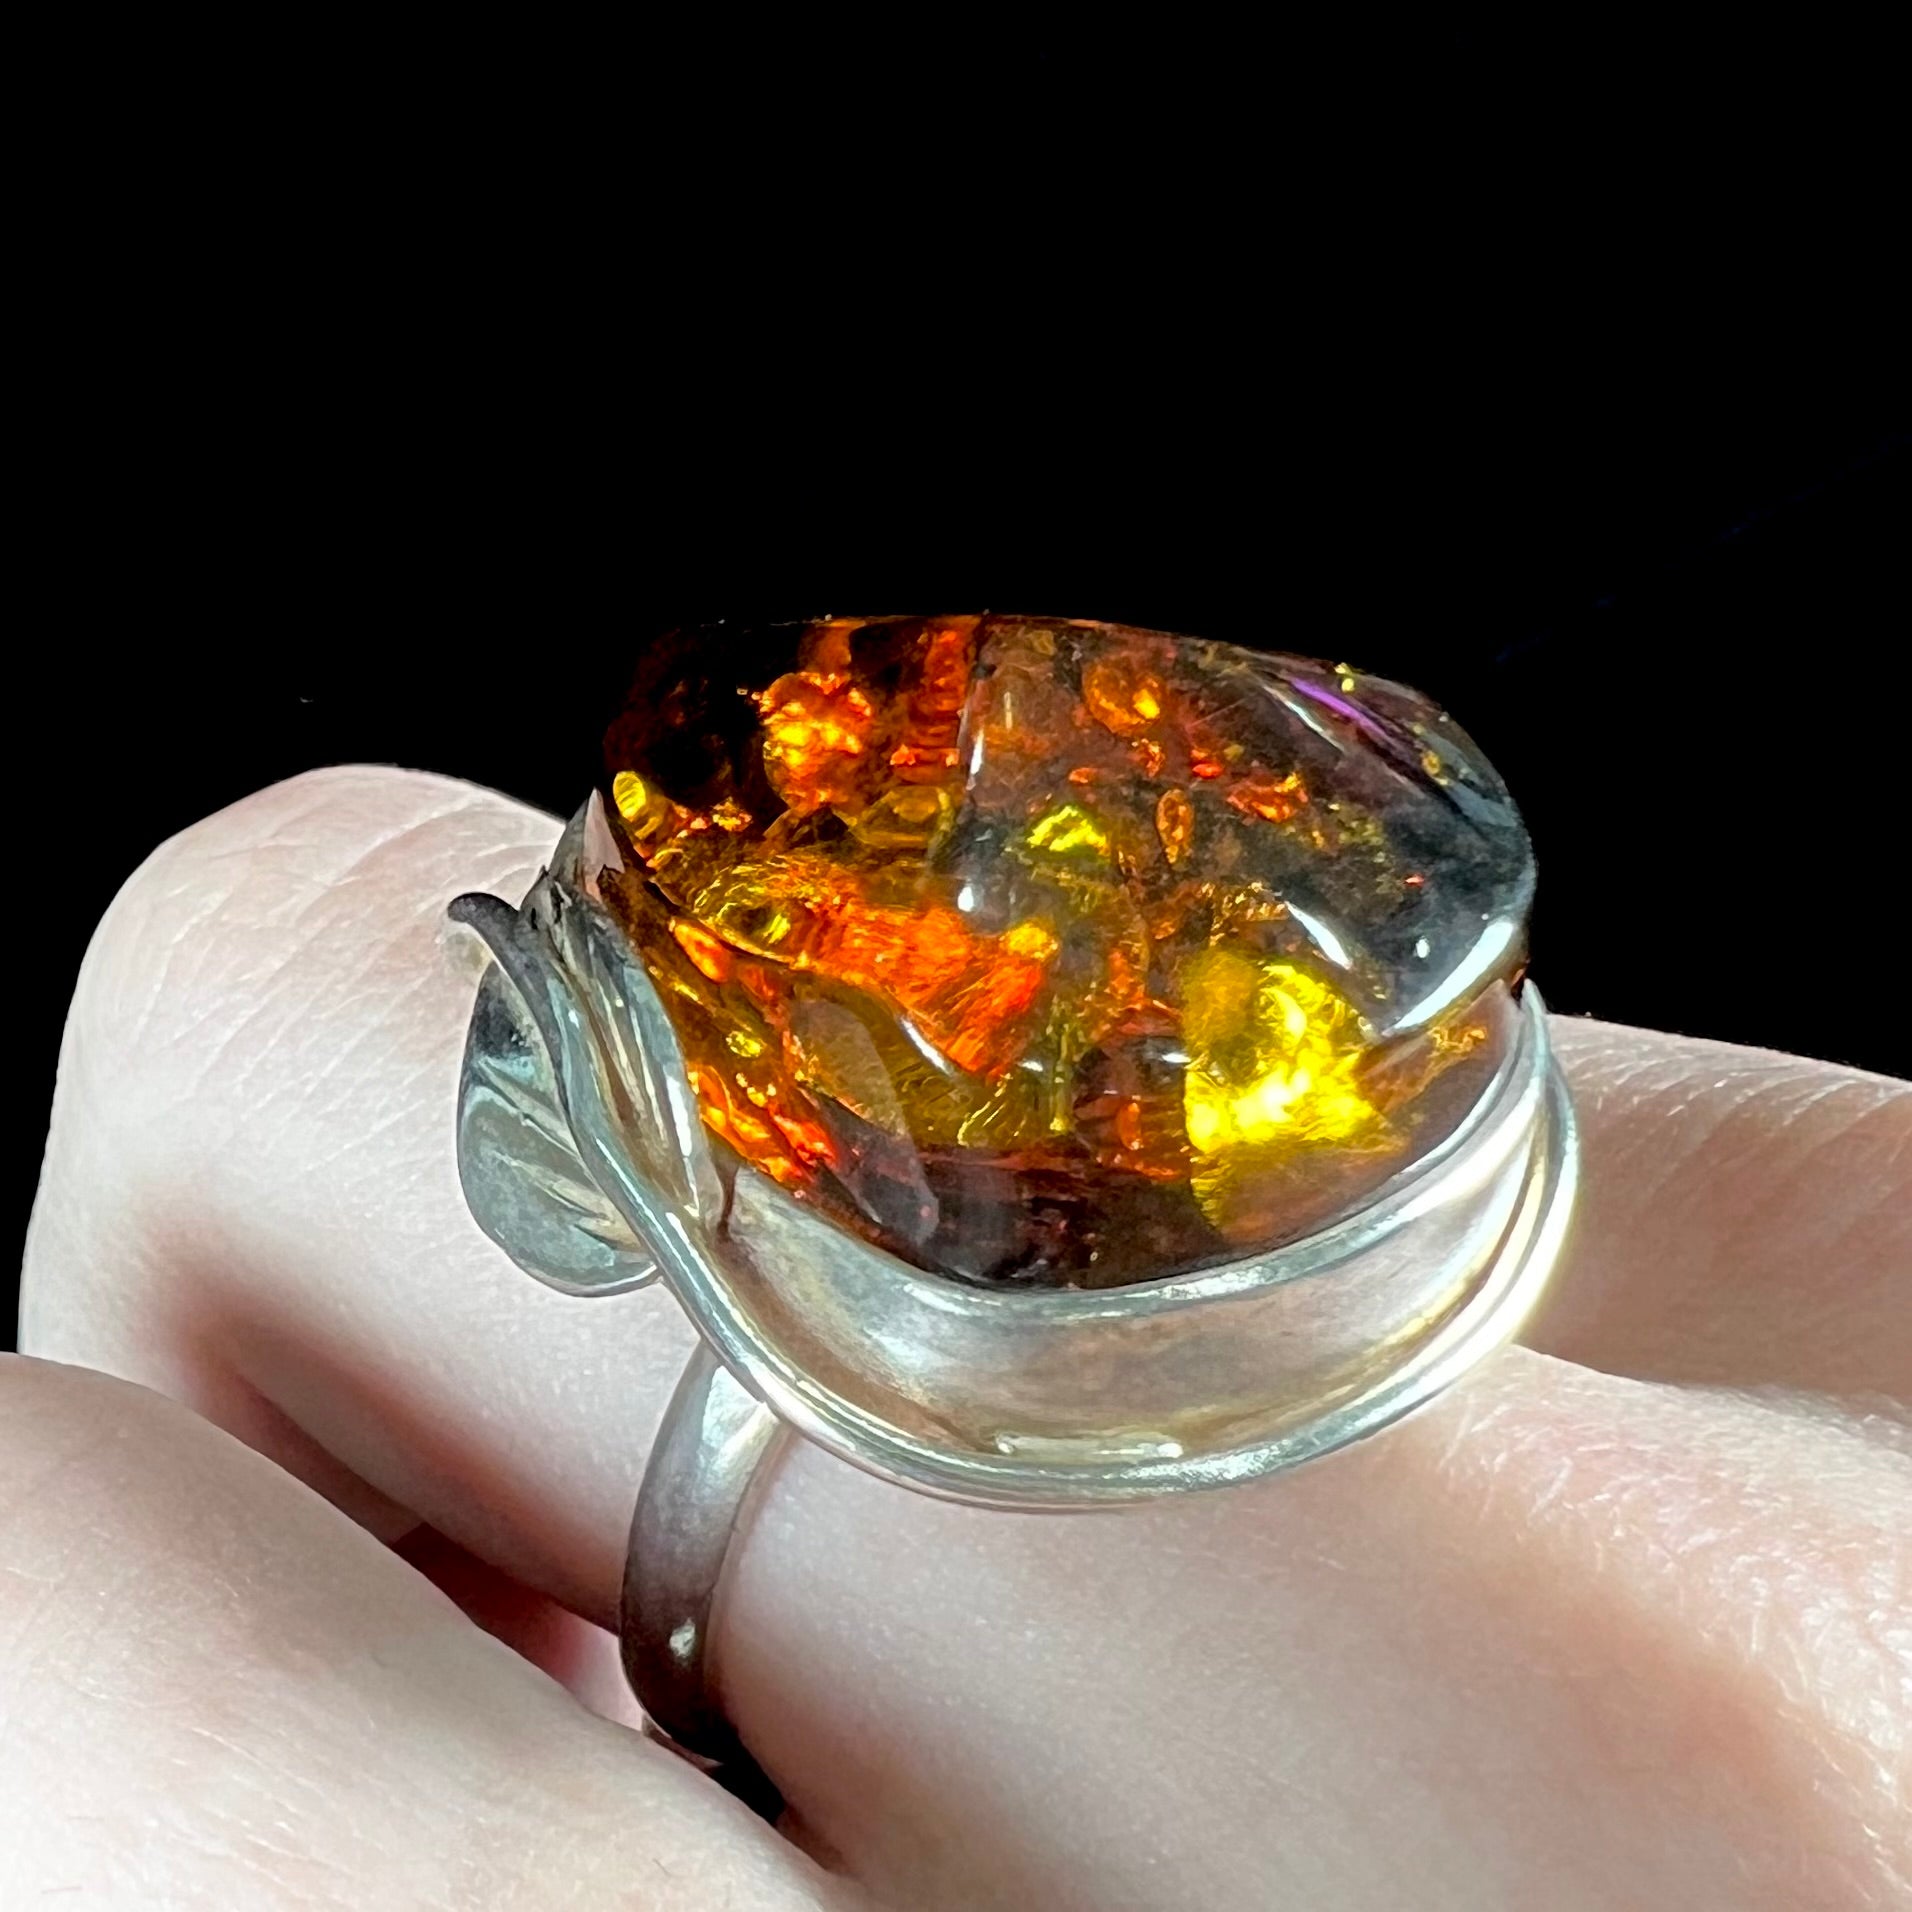 Unisex sterling silver ring set with a large sun-spangled Baltic amber gemstone.